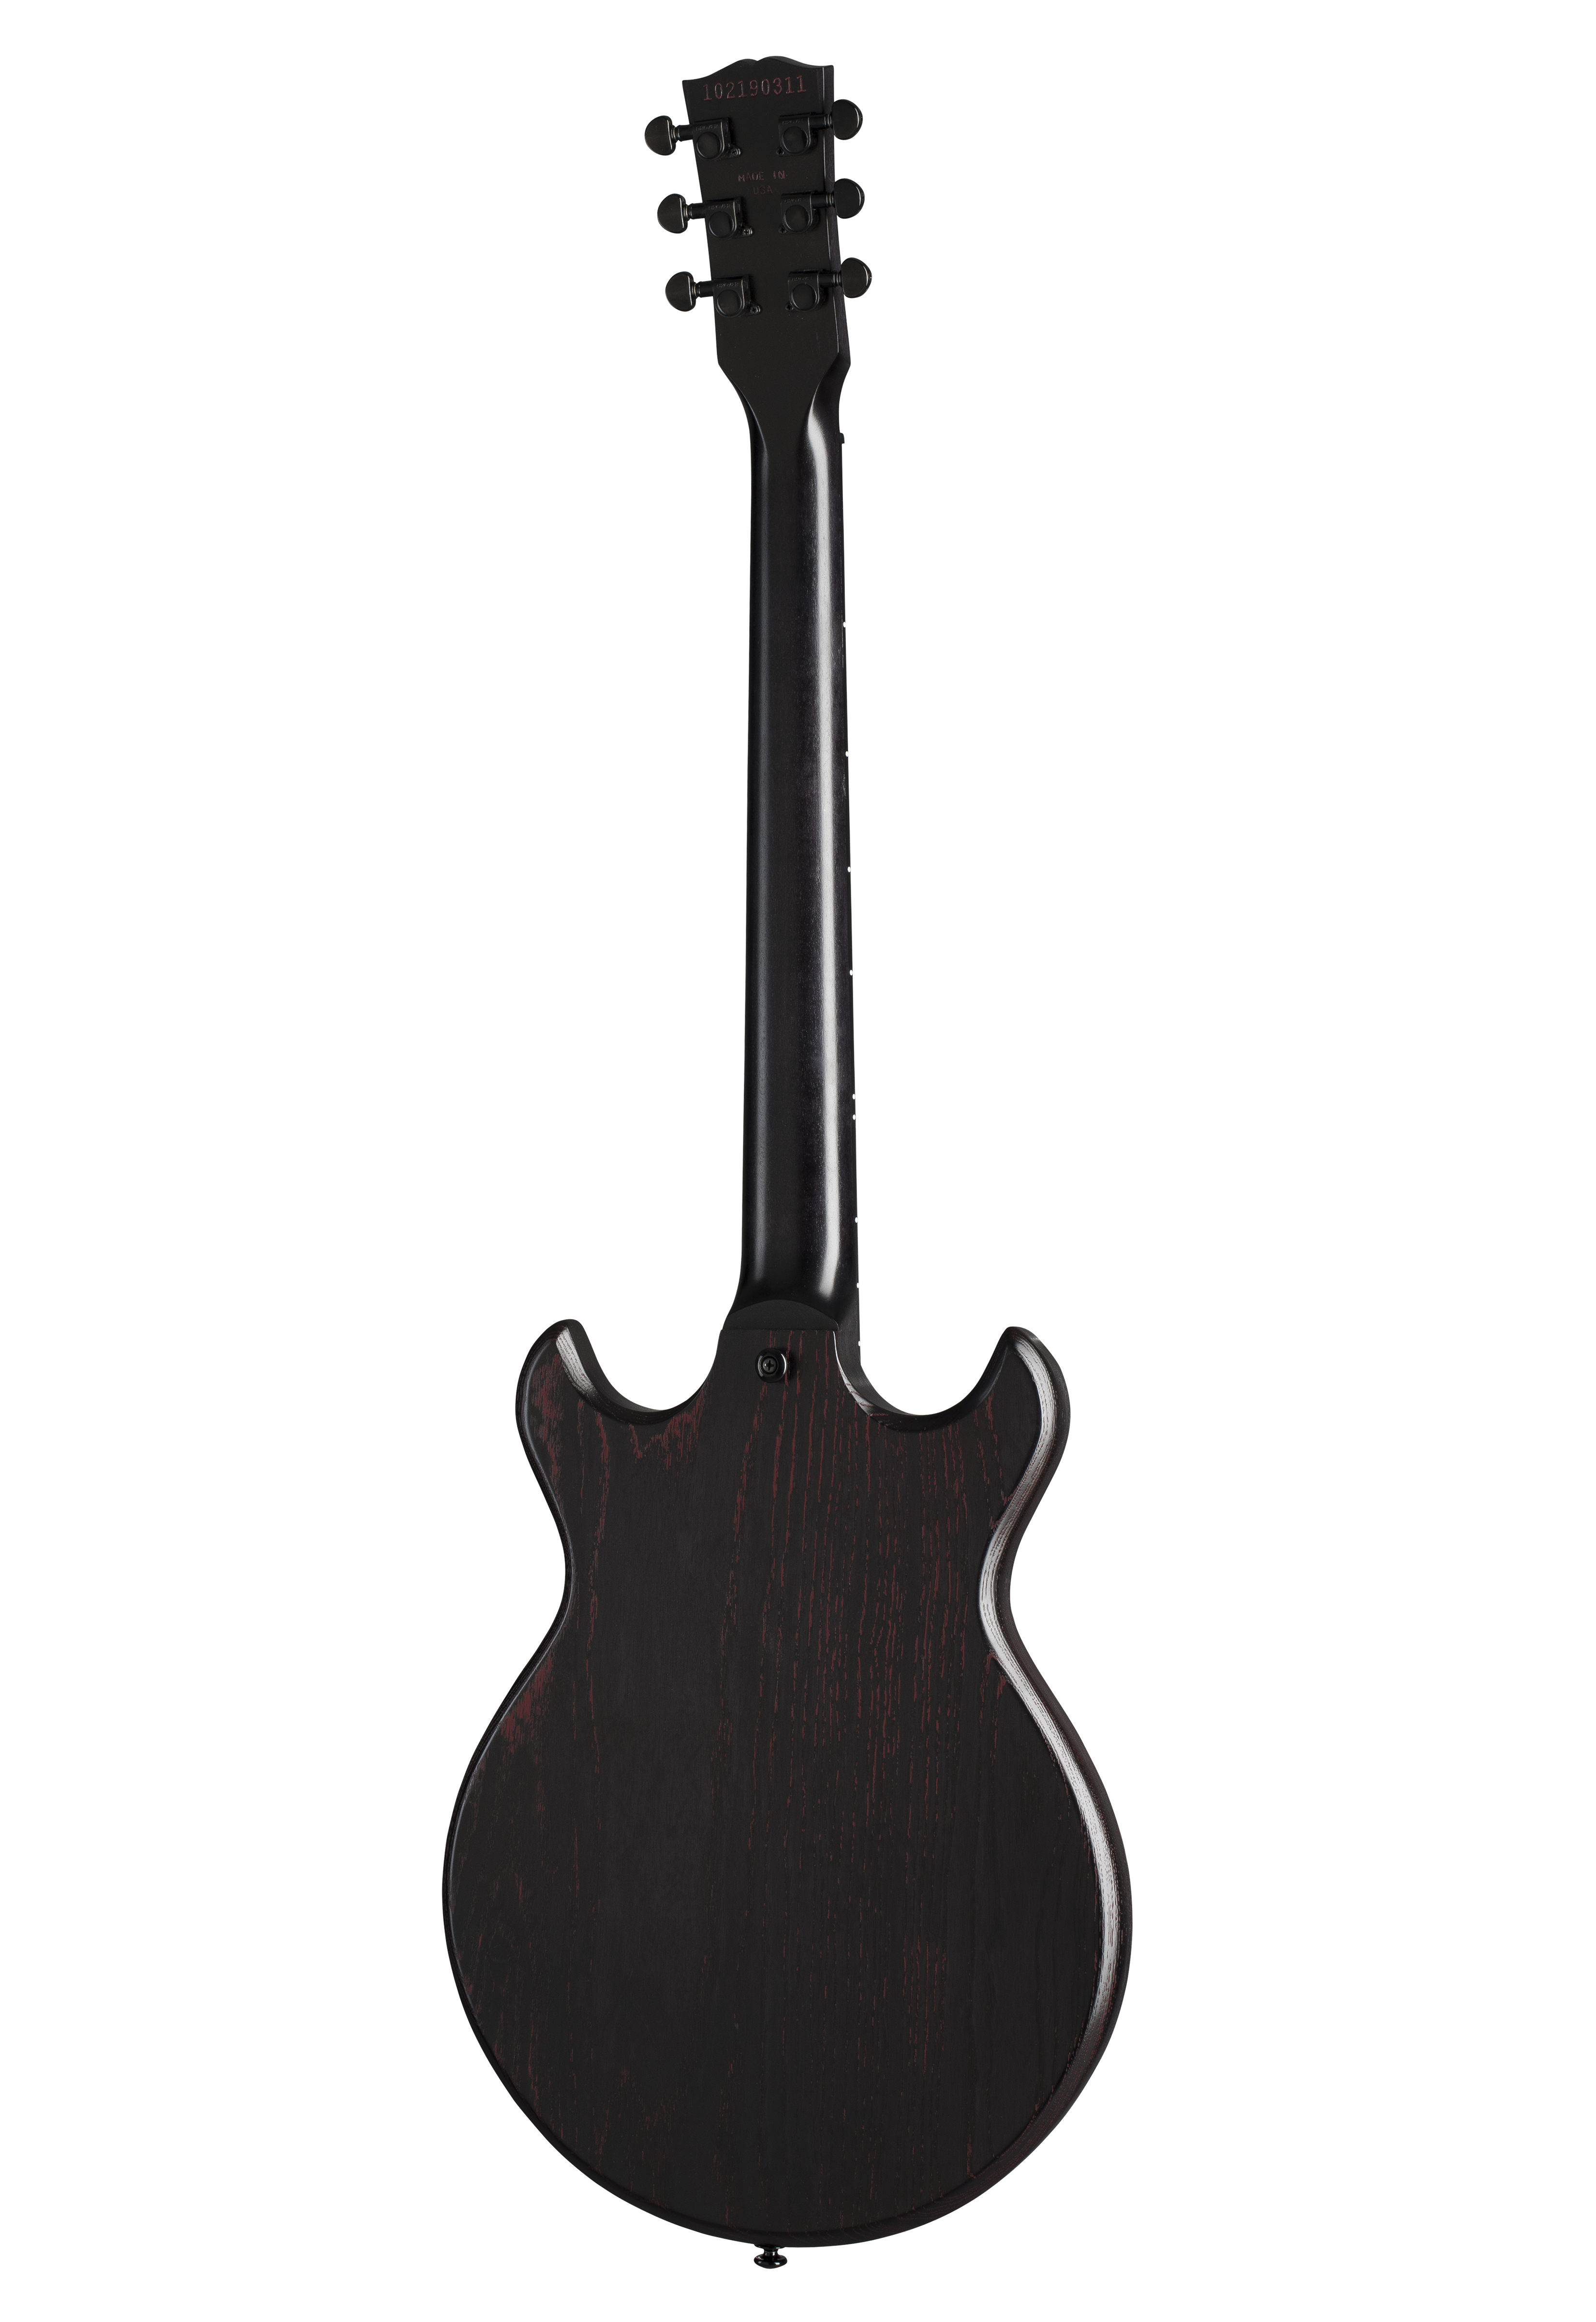 Gibson | Michael Clifford Signature Melody Maker Jet Black Cherry